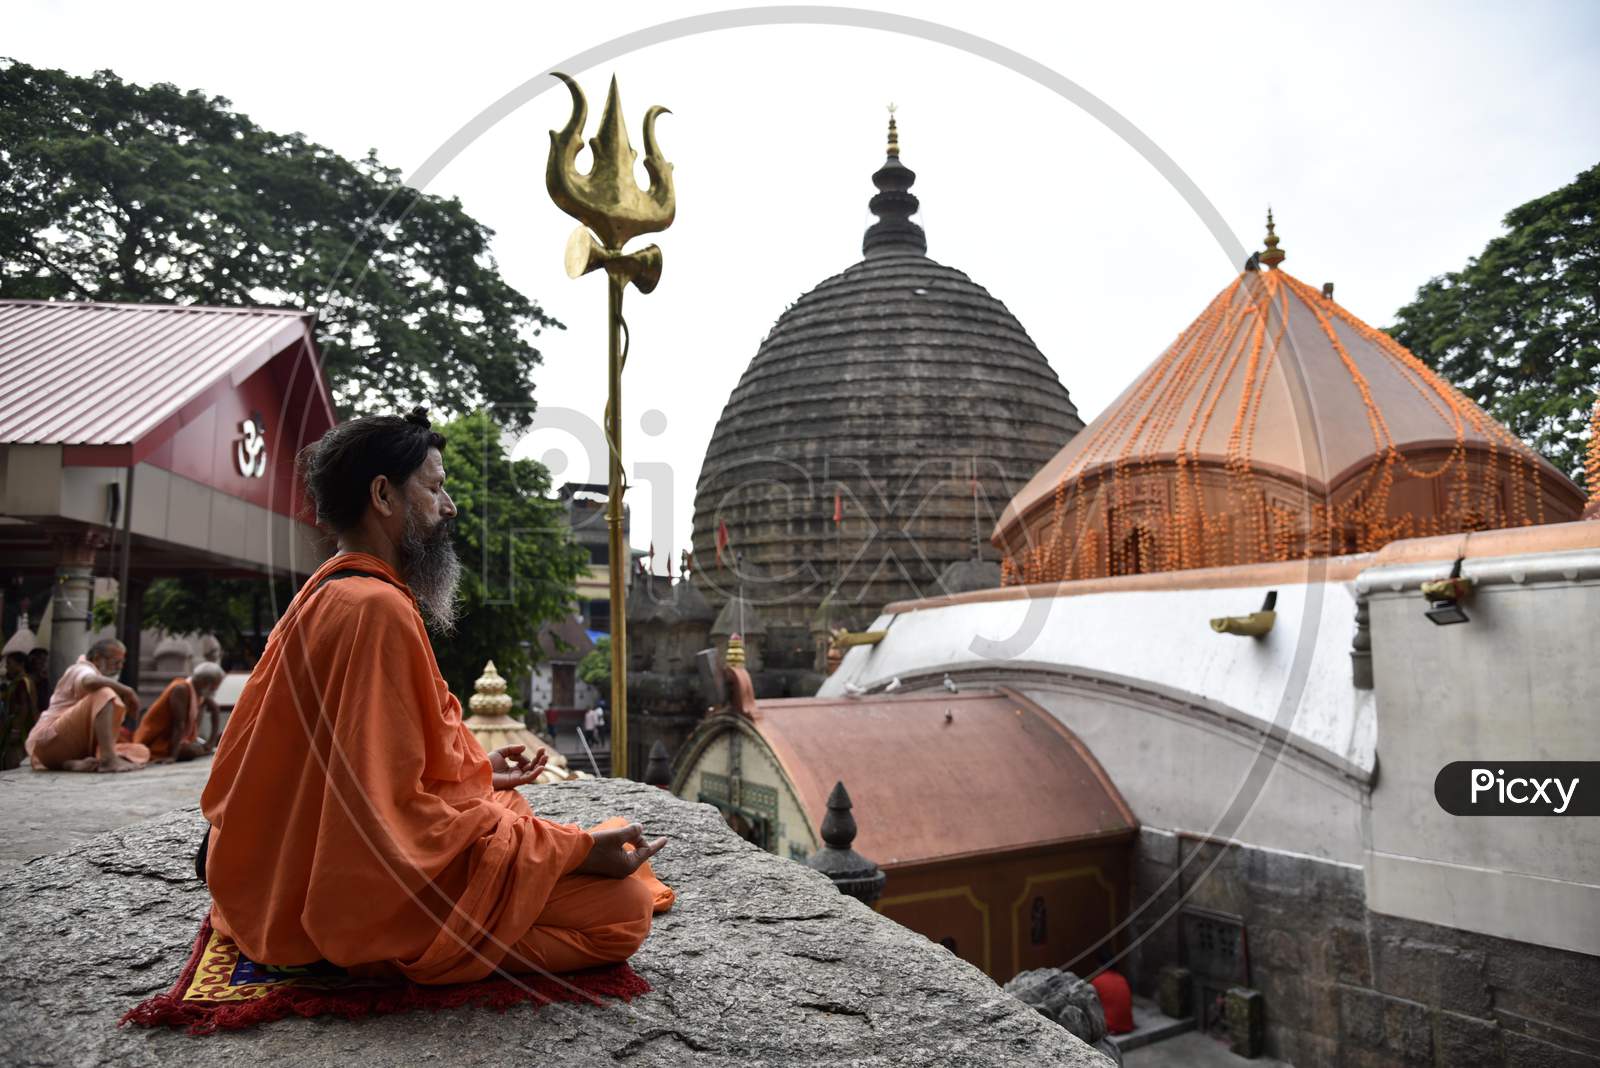 Hindu Holy Men Perform Yoga To Mark International Yoga Day At Kamakhya Temple In Guwahati In The Indian State Of Assam On June 21, 2019. Photo: Str